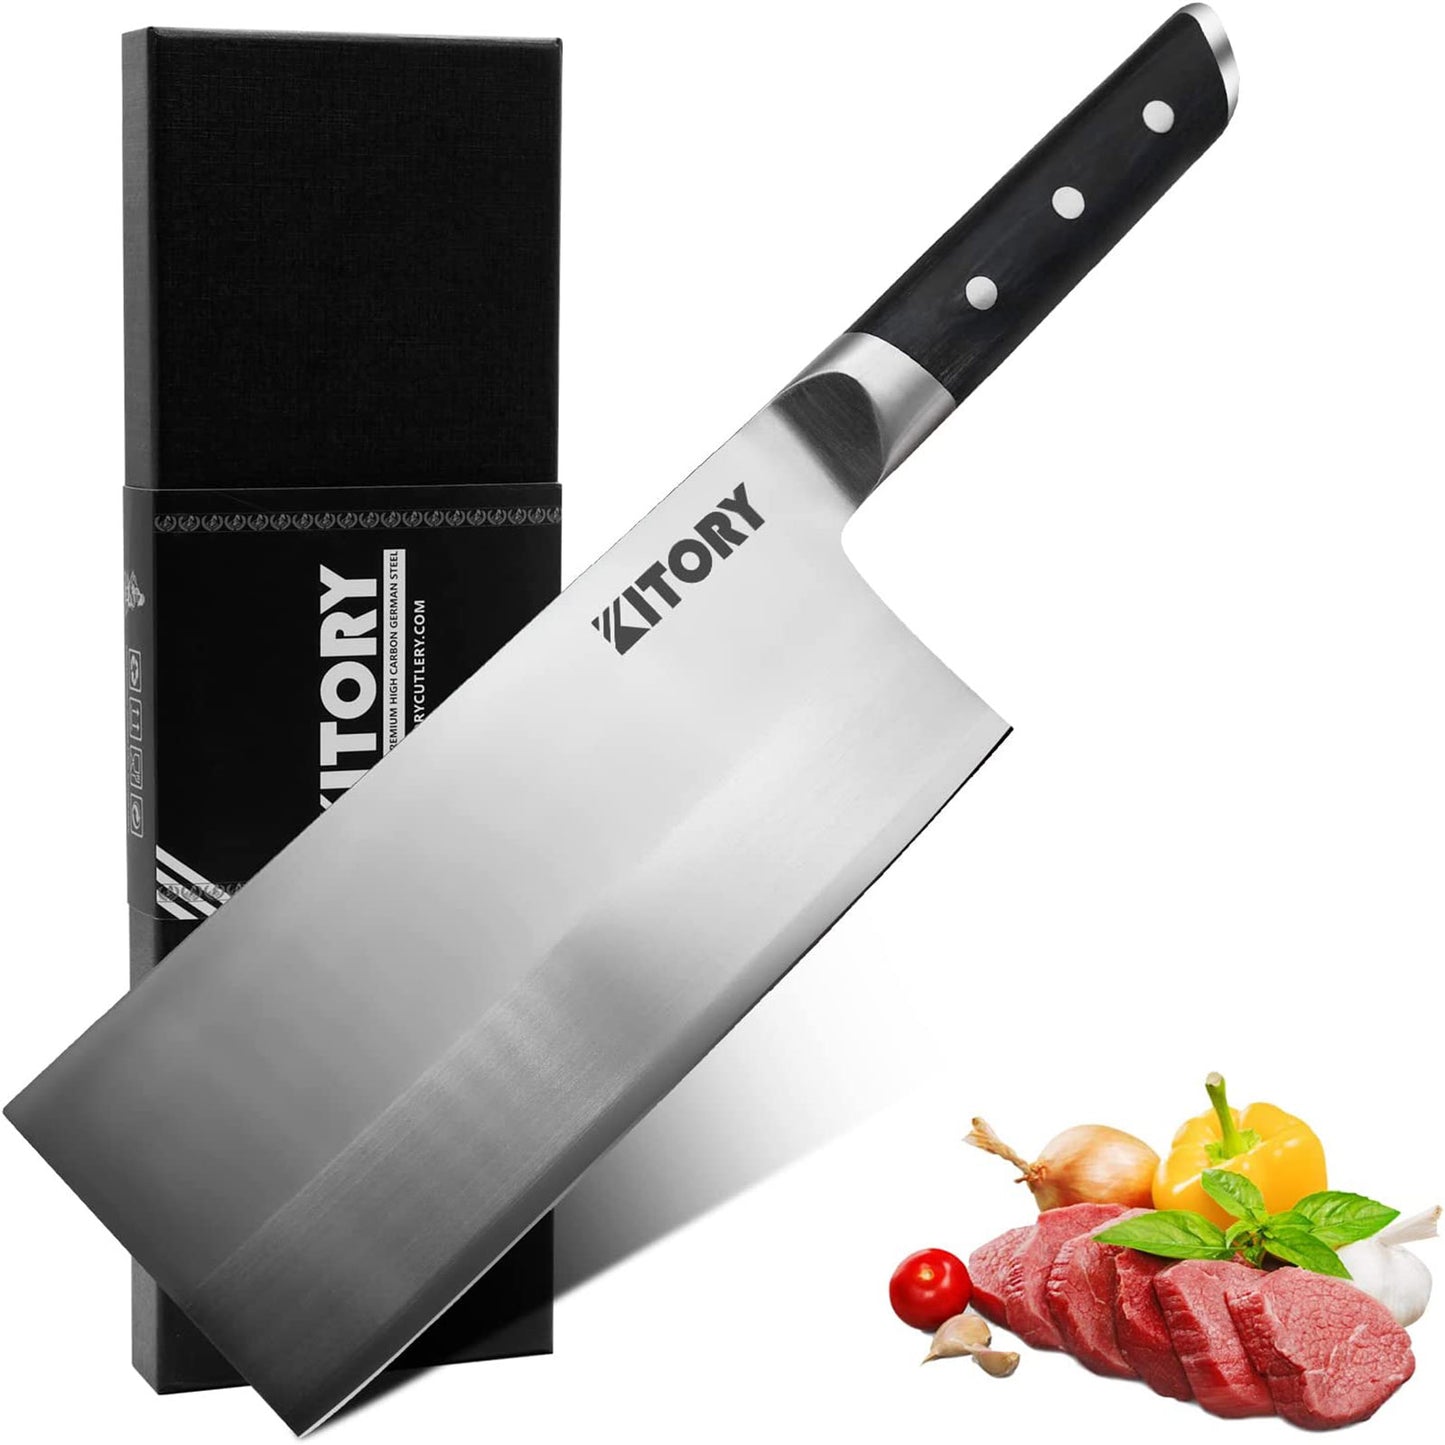 7 Inch Asian/Vegetable Cleaver w Gift Box, Black ABS Handle